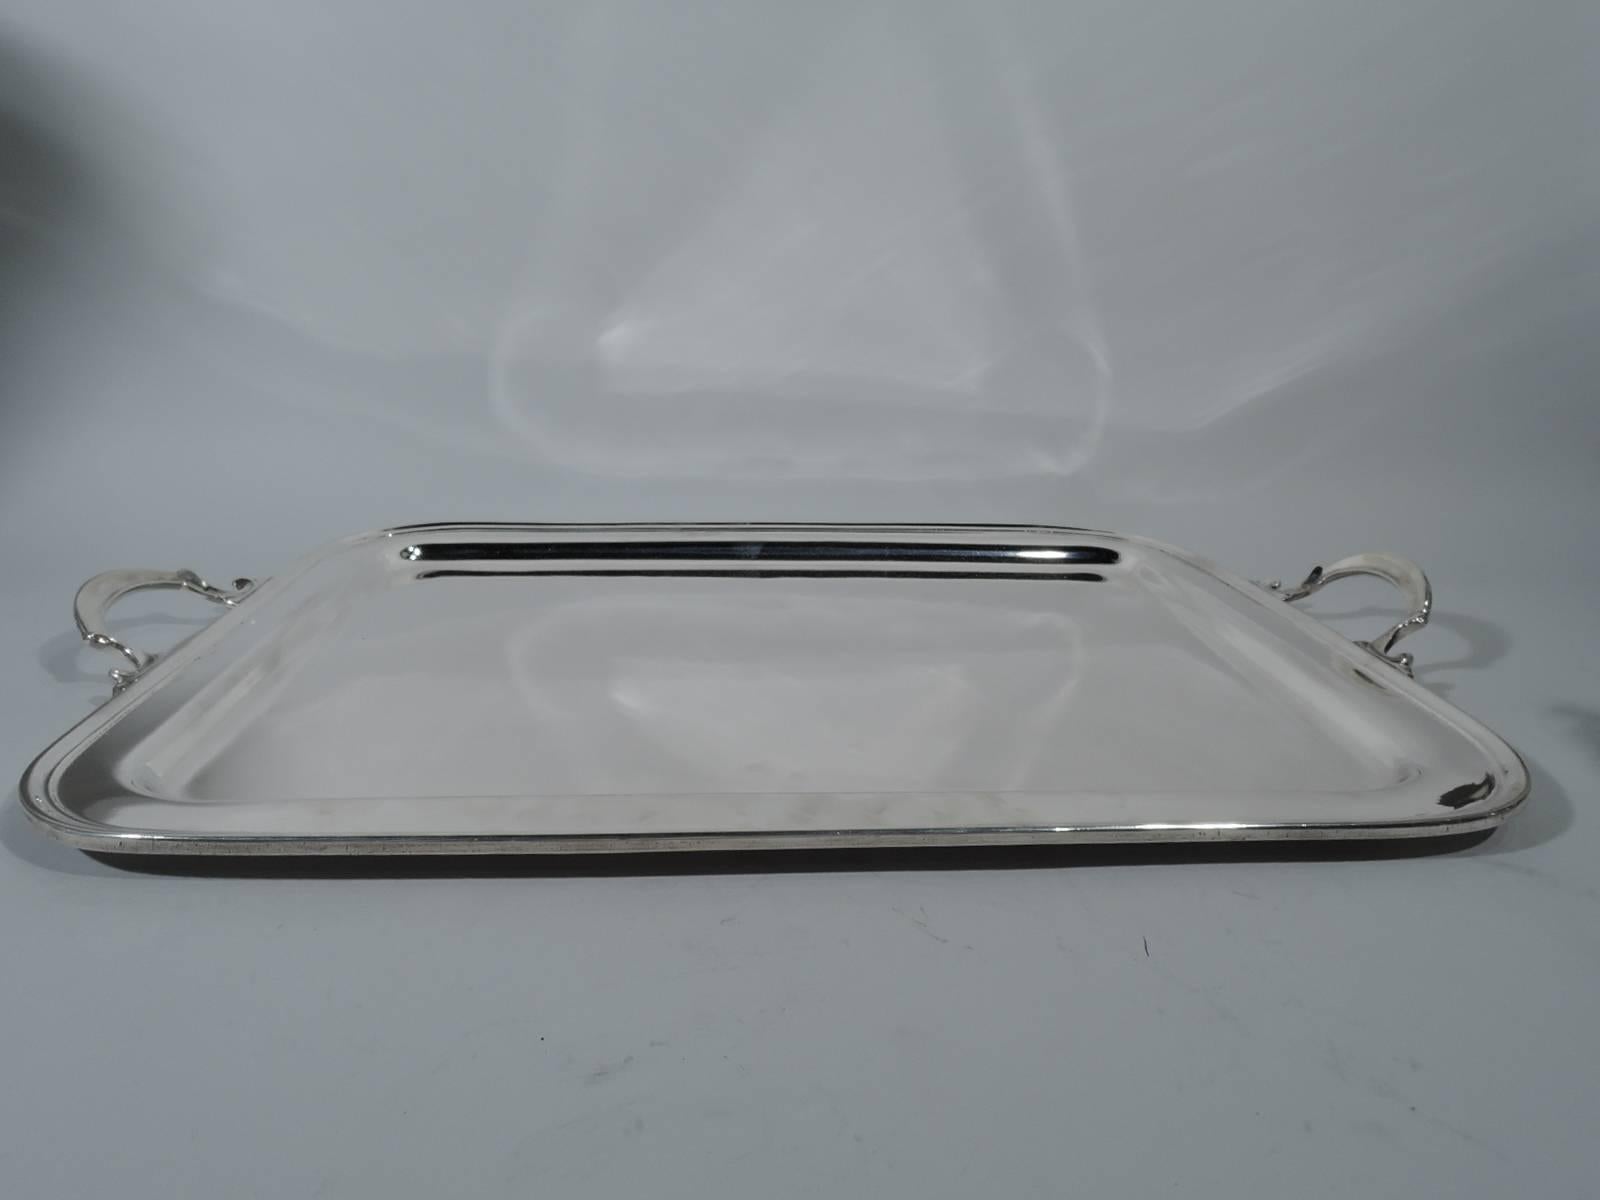 Classic sterling silver tea tray. Made by Tiffany & Co. in New York. Rectangular with round corners and molded rim. End bracket handles scrolled with stylized leaf mounts. Restrained and functional in the Modern style, though also goes with the